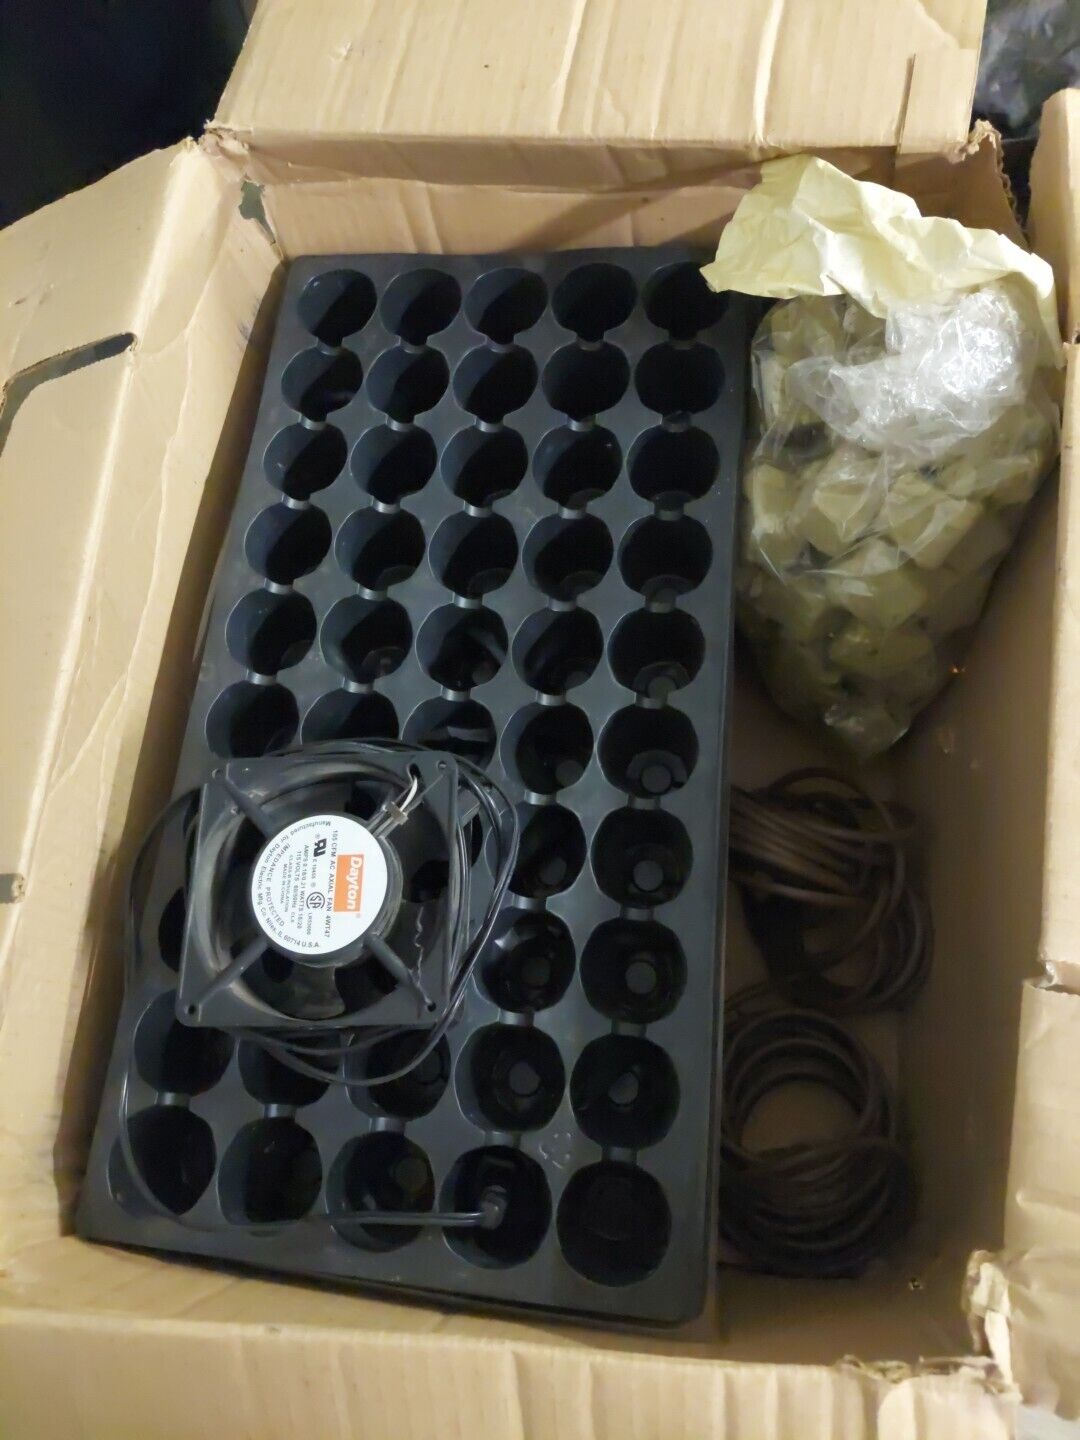 Indoor Hydroponic Grow Light And Electronic Ballast And Accessories